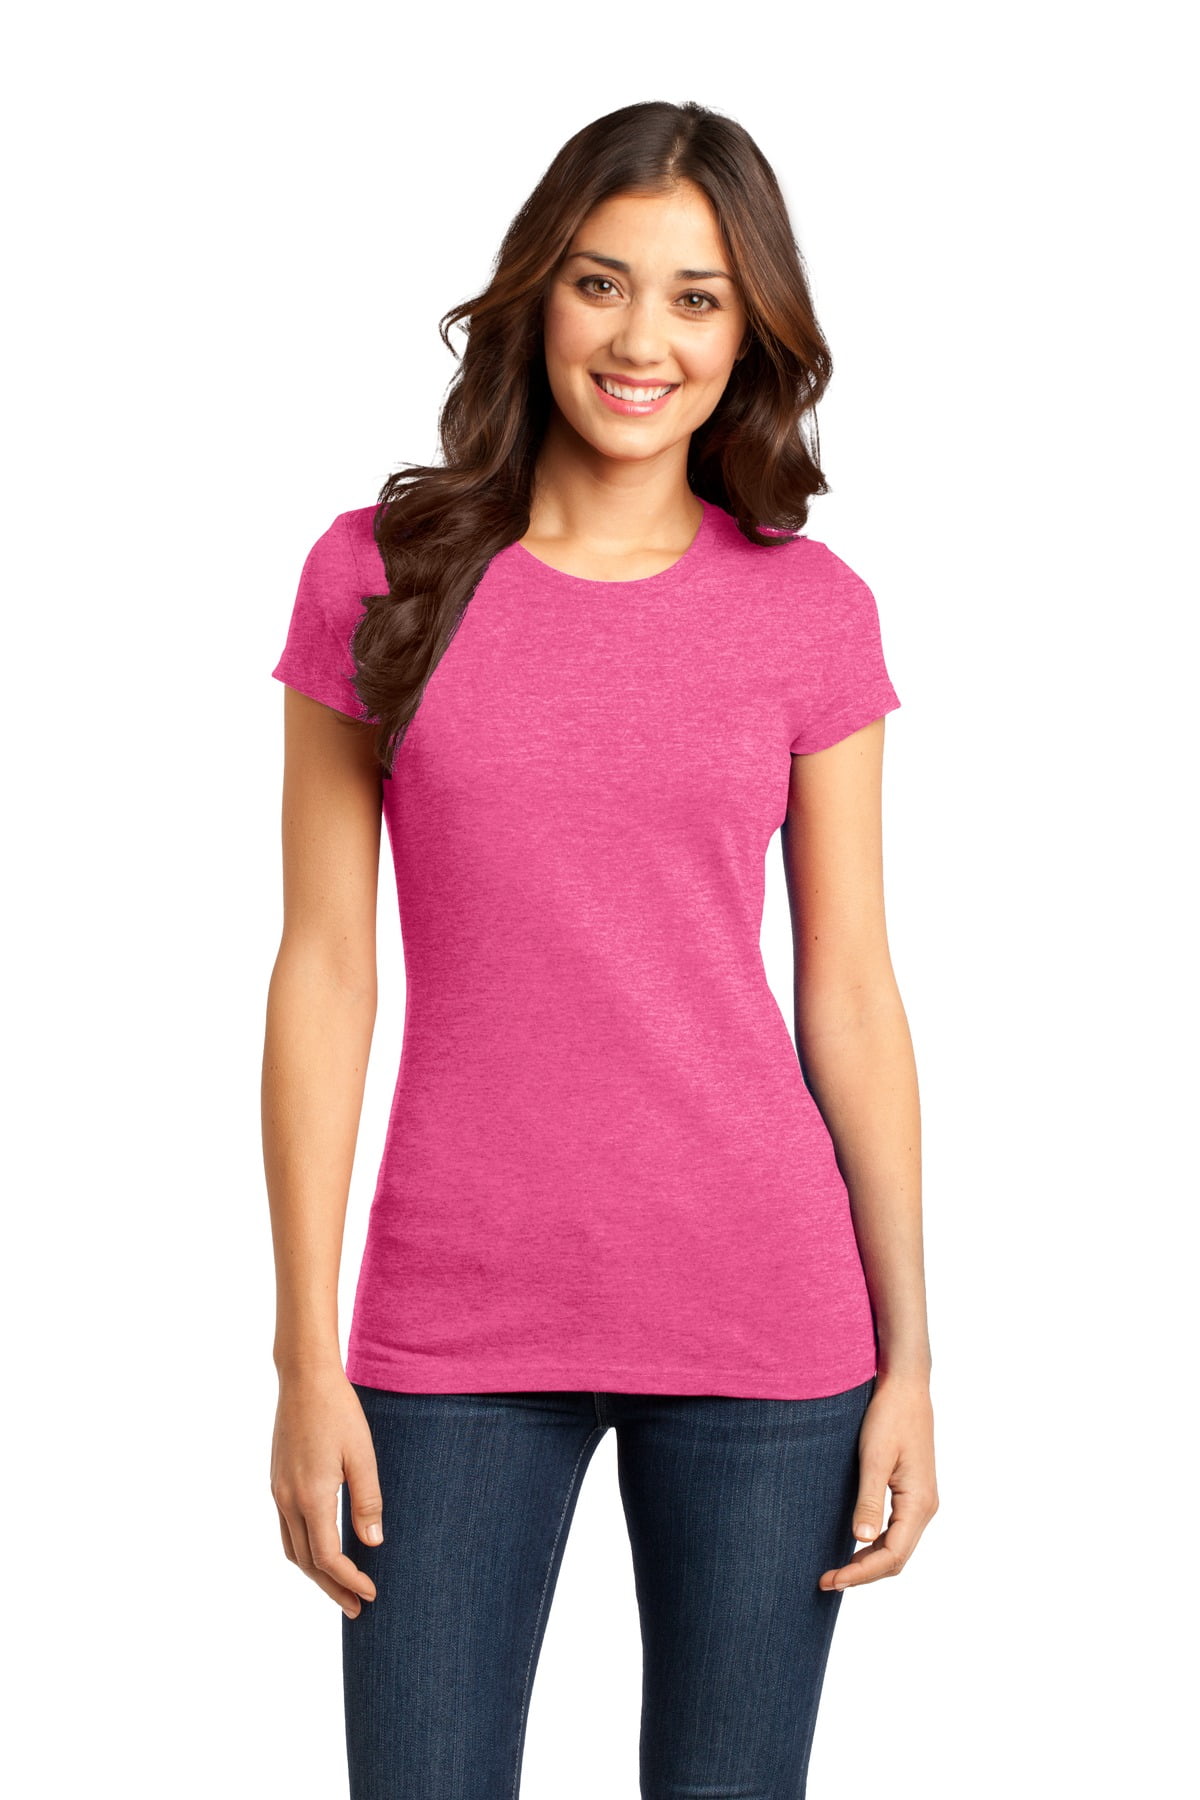 District DT6001 Juniors Very Important Tee , Fuchsia Frost, 3XL